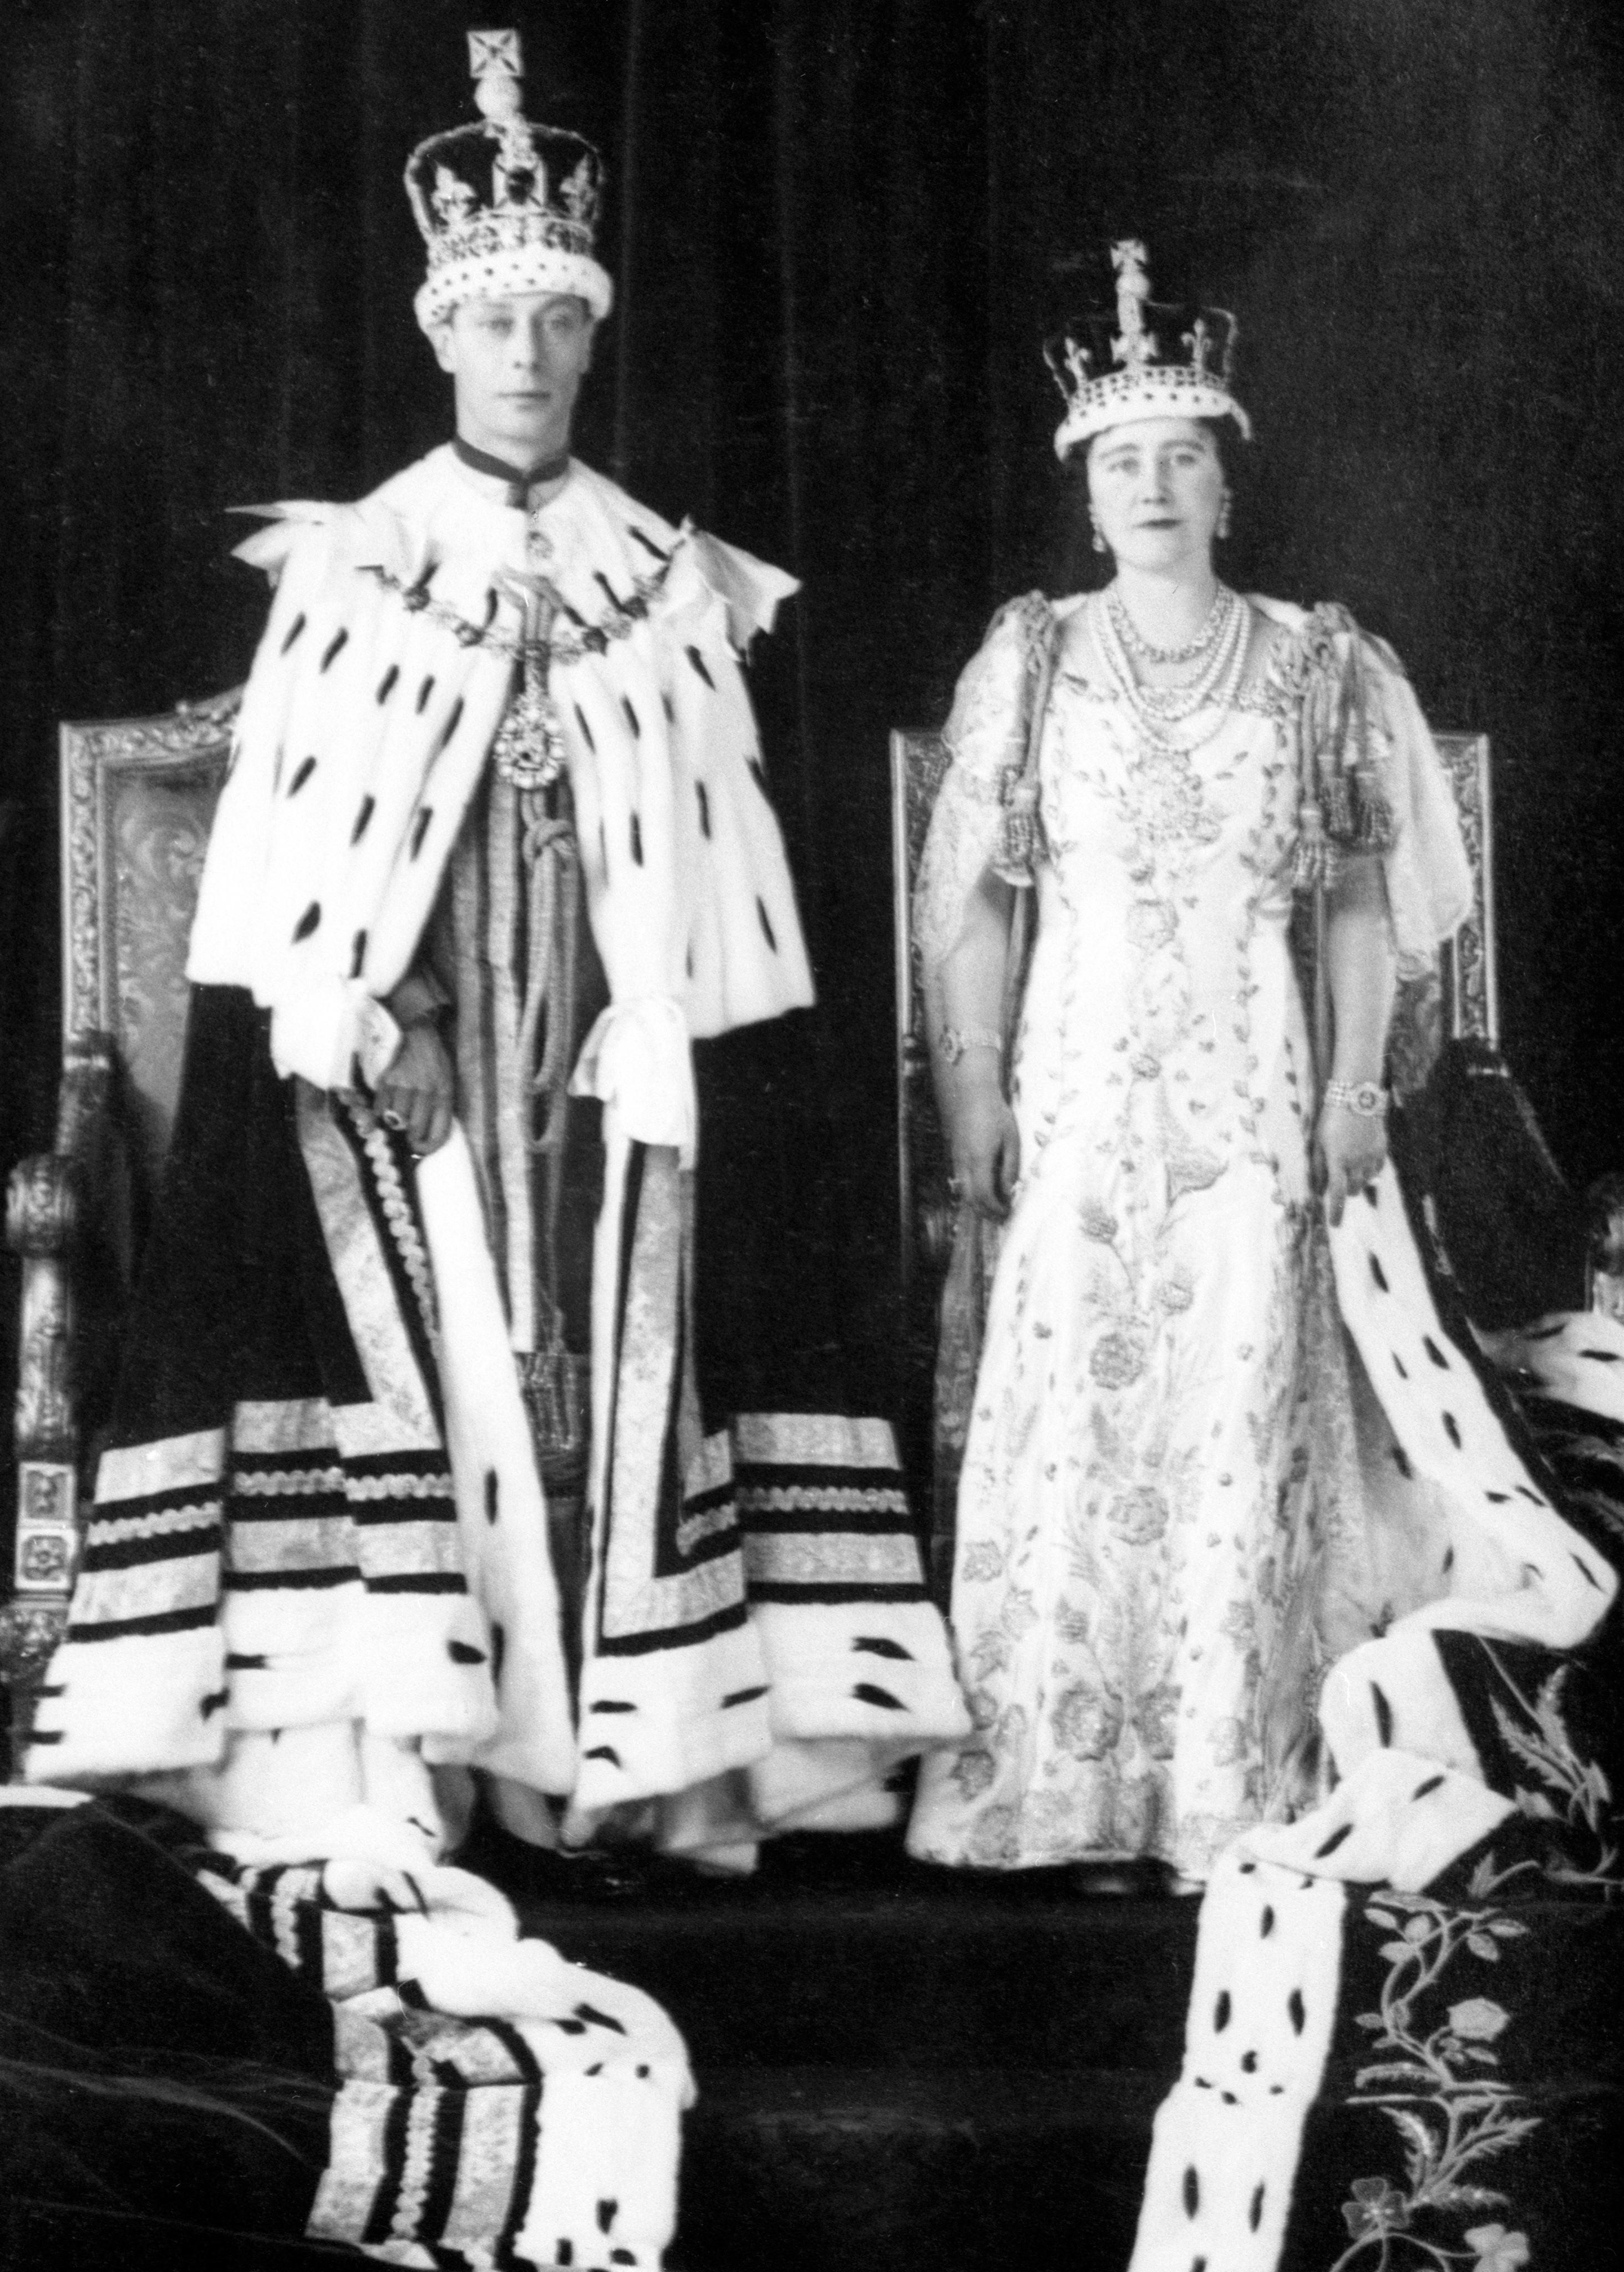 King George VI and his wife Queen Elizabeth